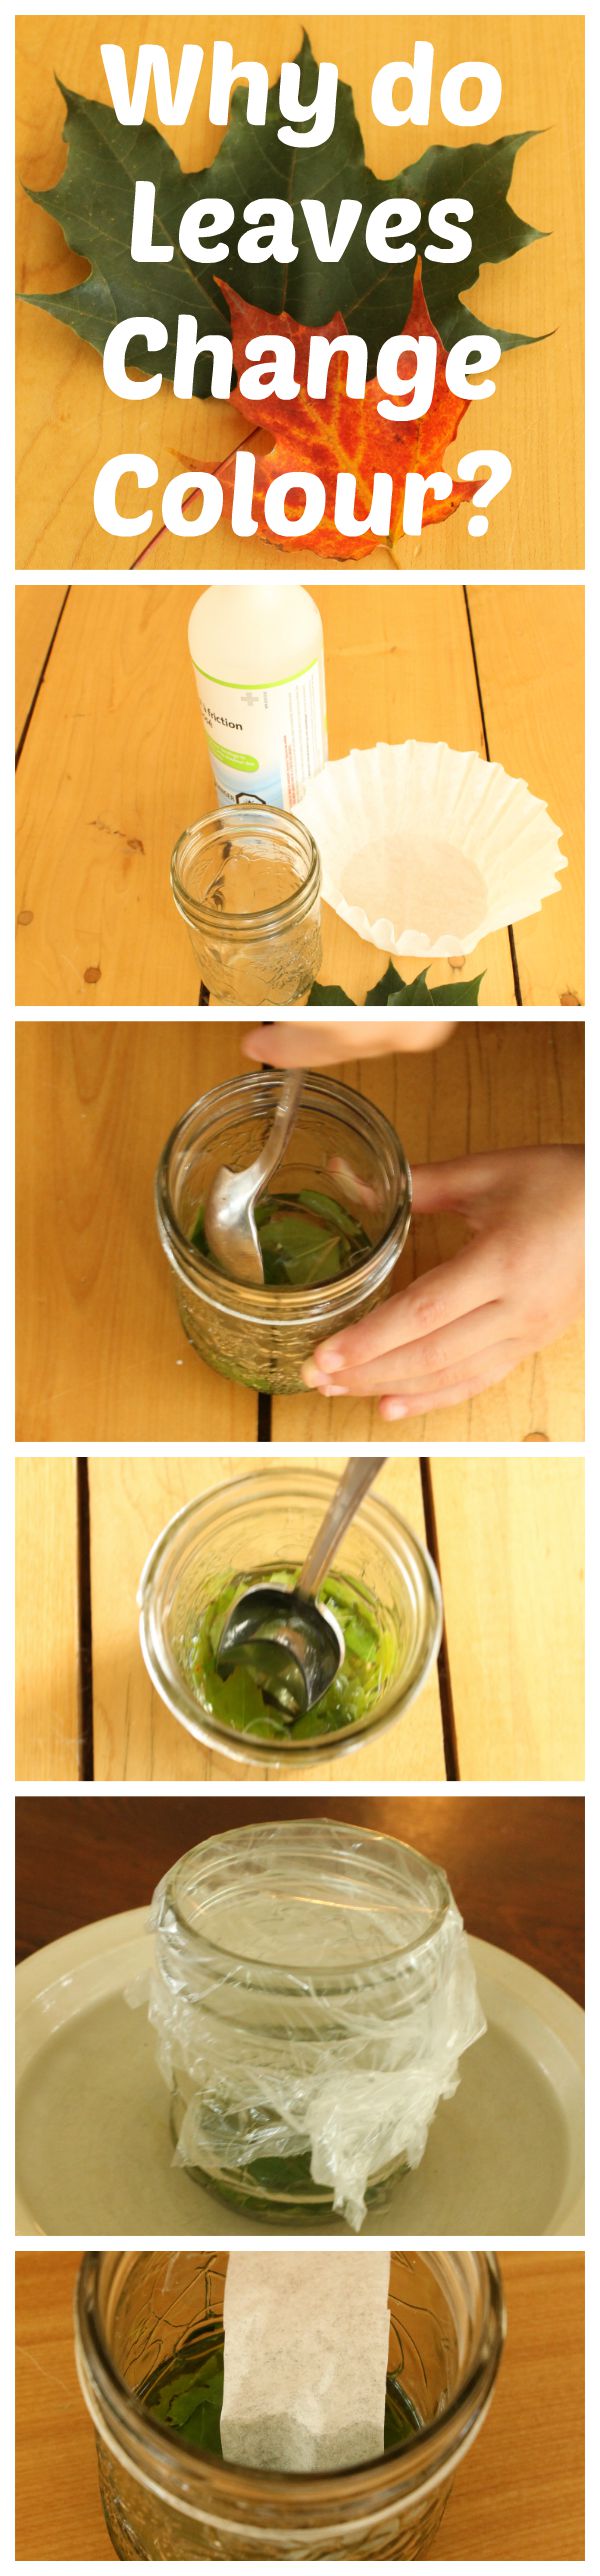 A simple science experiment to show why leaves change color!